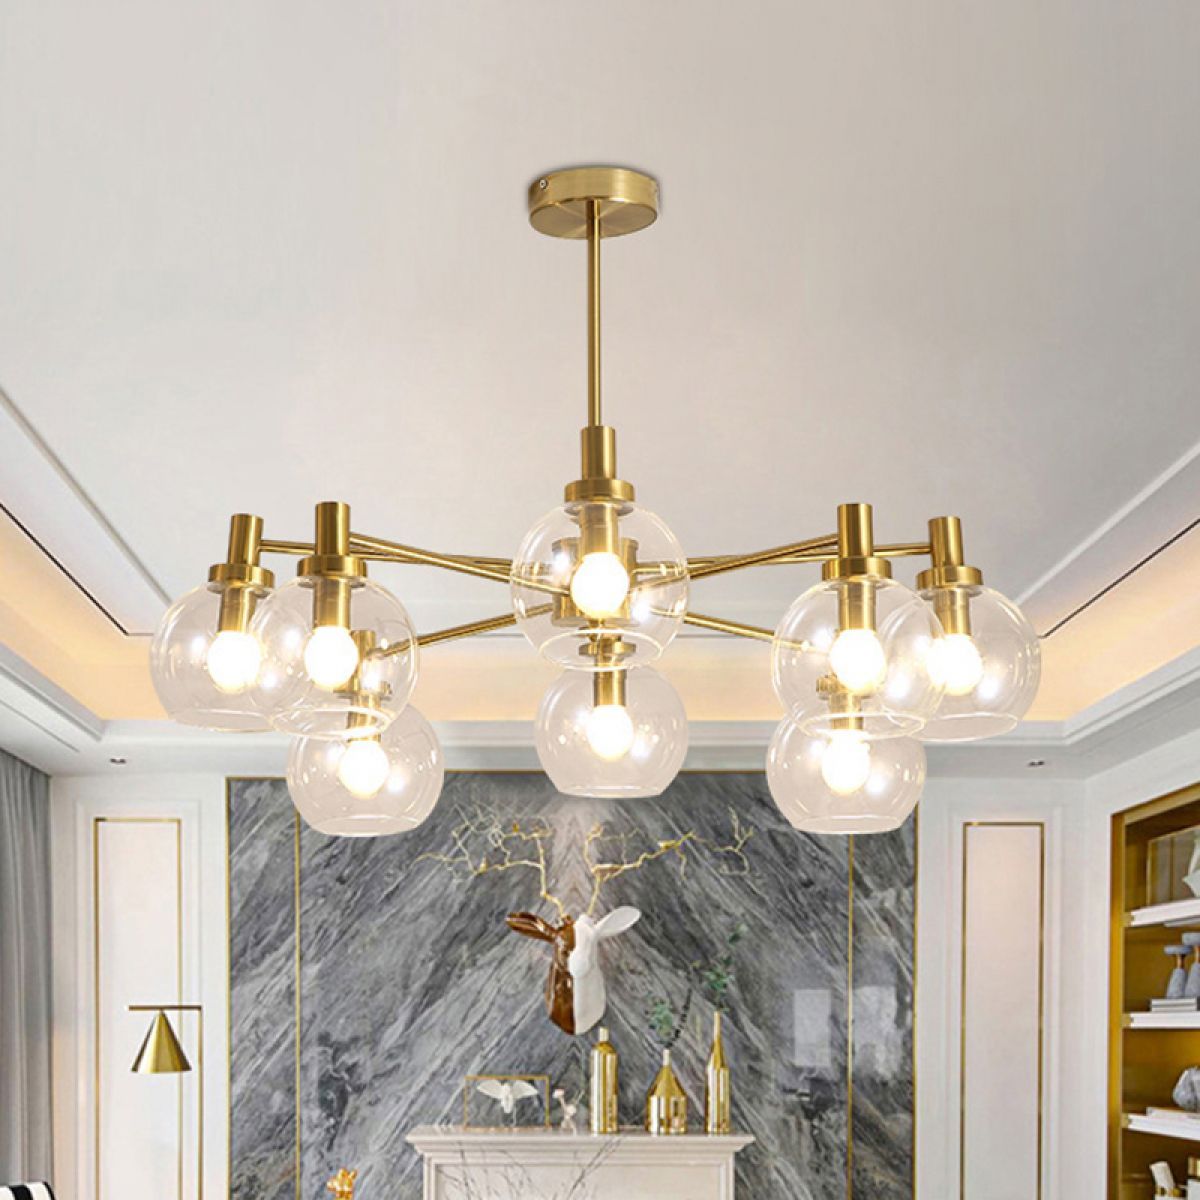 Metal Sputnik Chandelier Lamp Modern 8 Heads Gold Ceiling Pertaining To Gold And Wood Sputnik Orb Chandeliers (View 9 of 15)